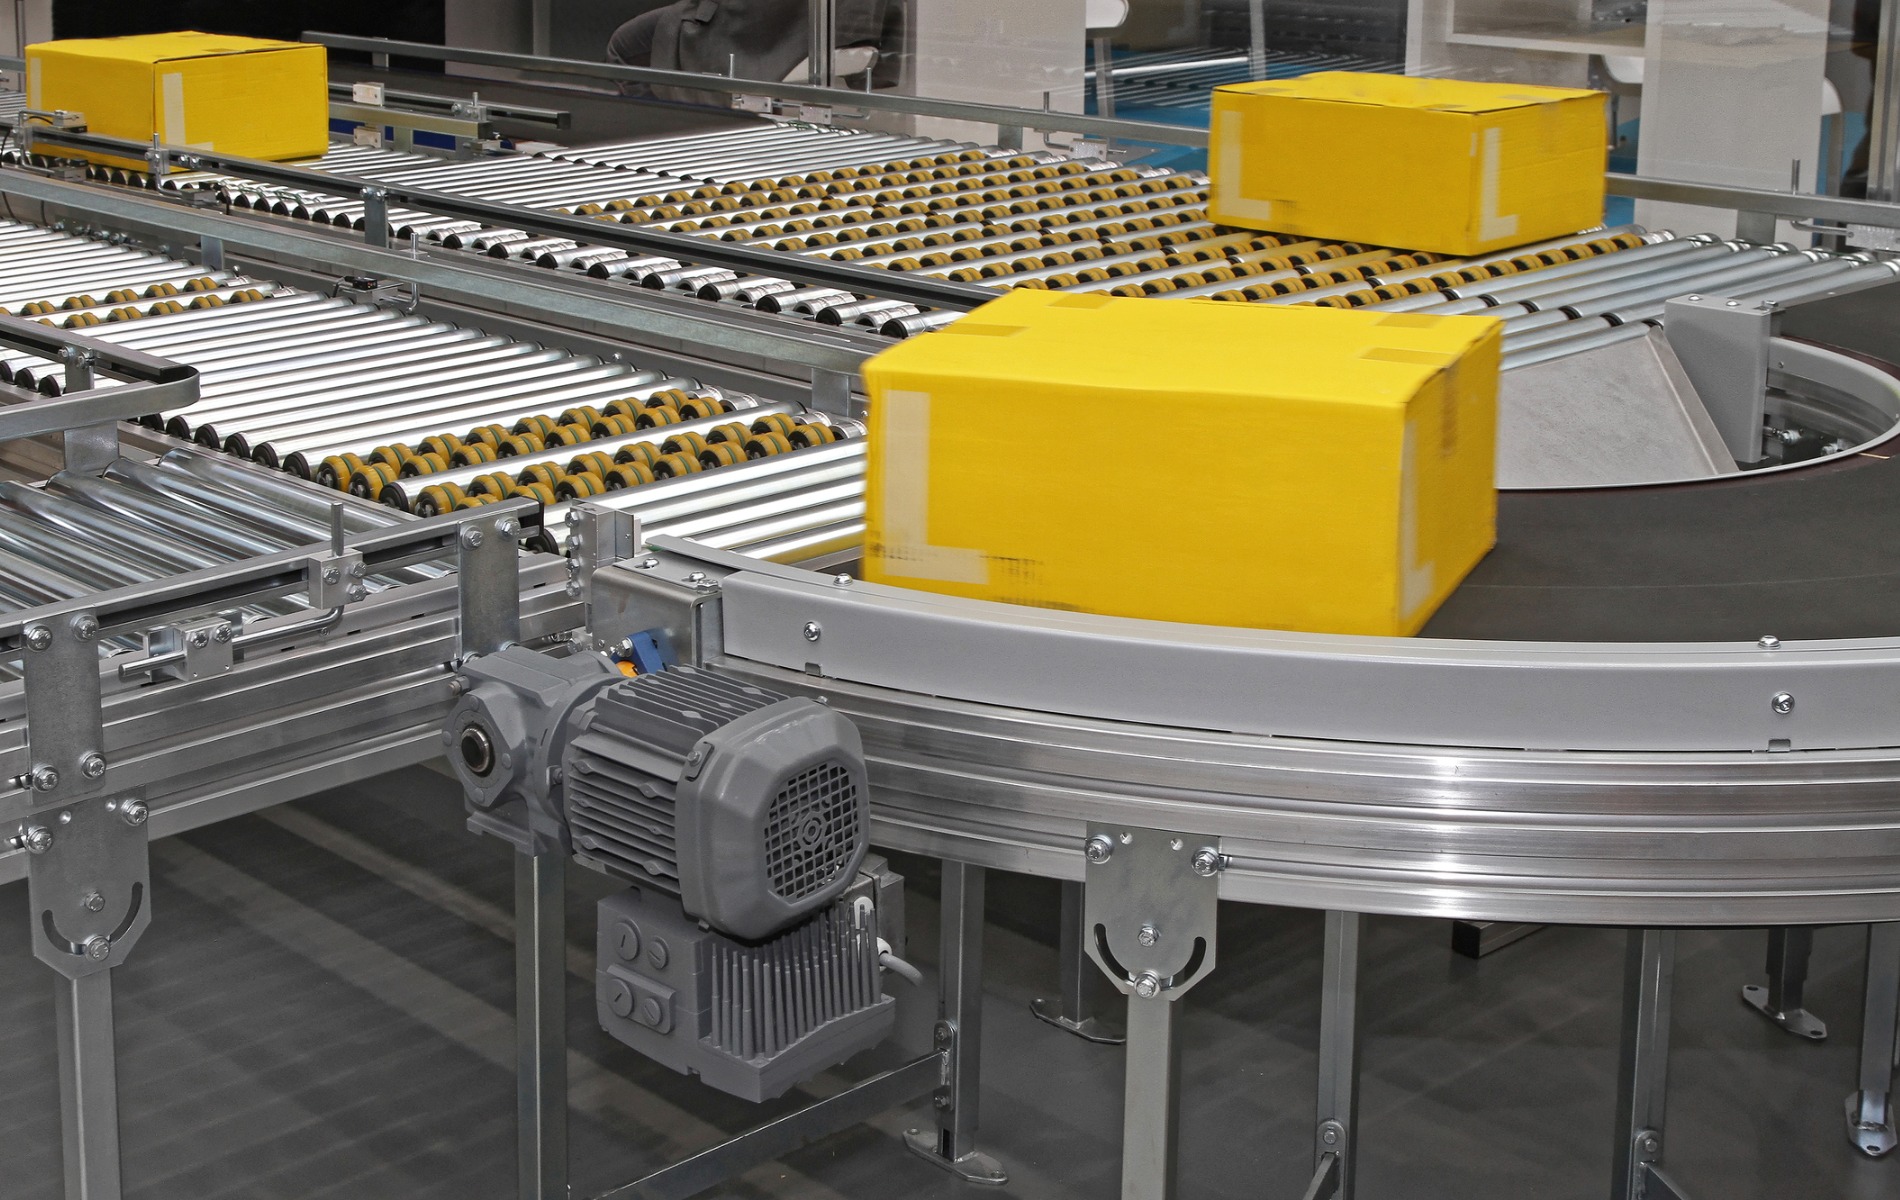 7 Key Factors in Selecting the Right Conveyor